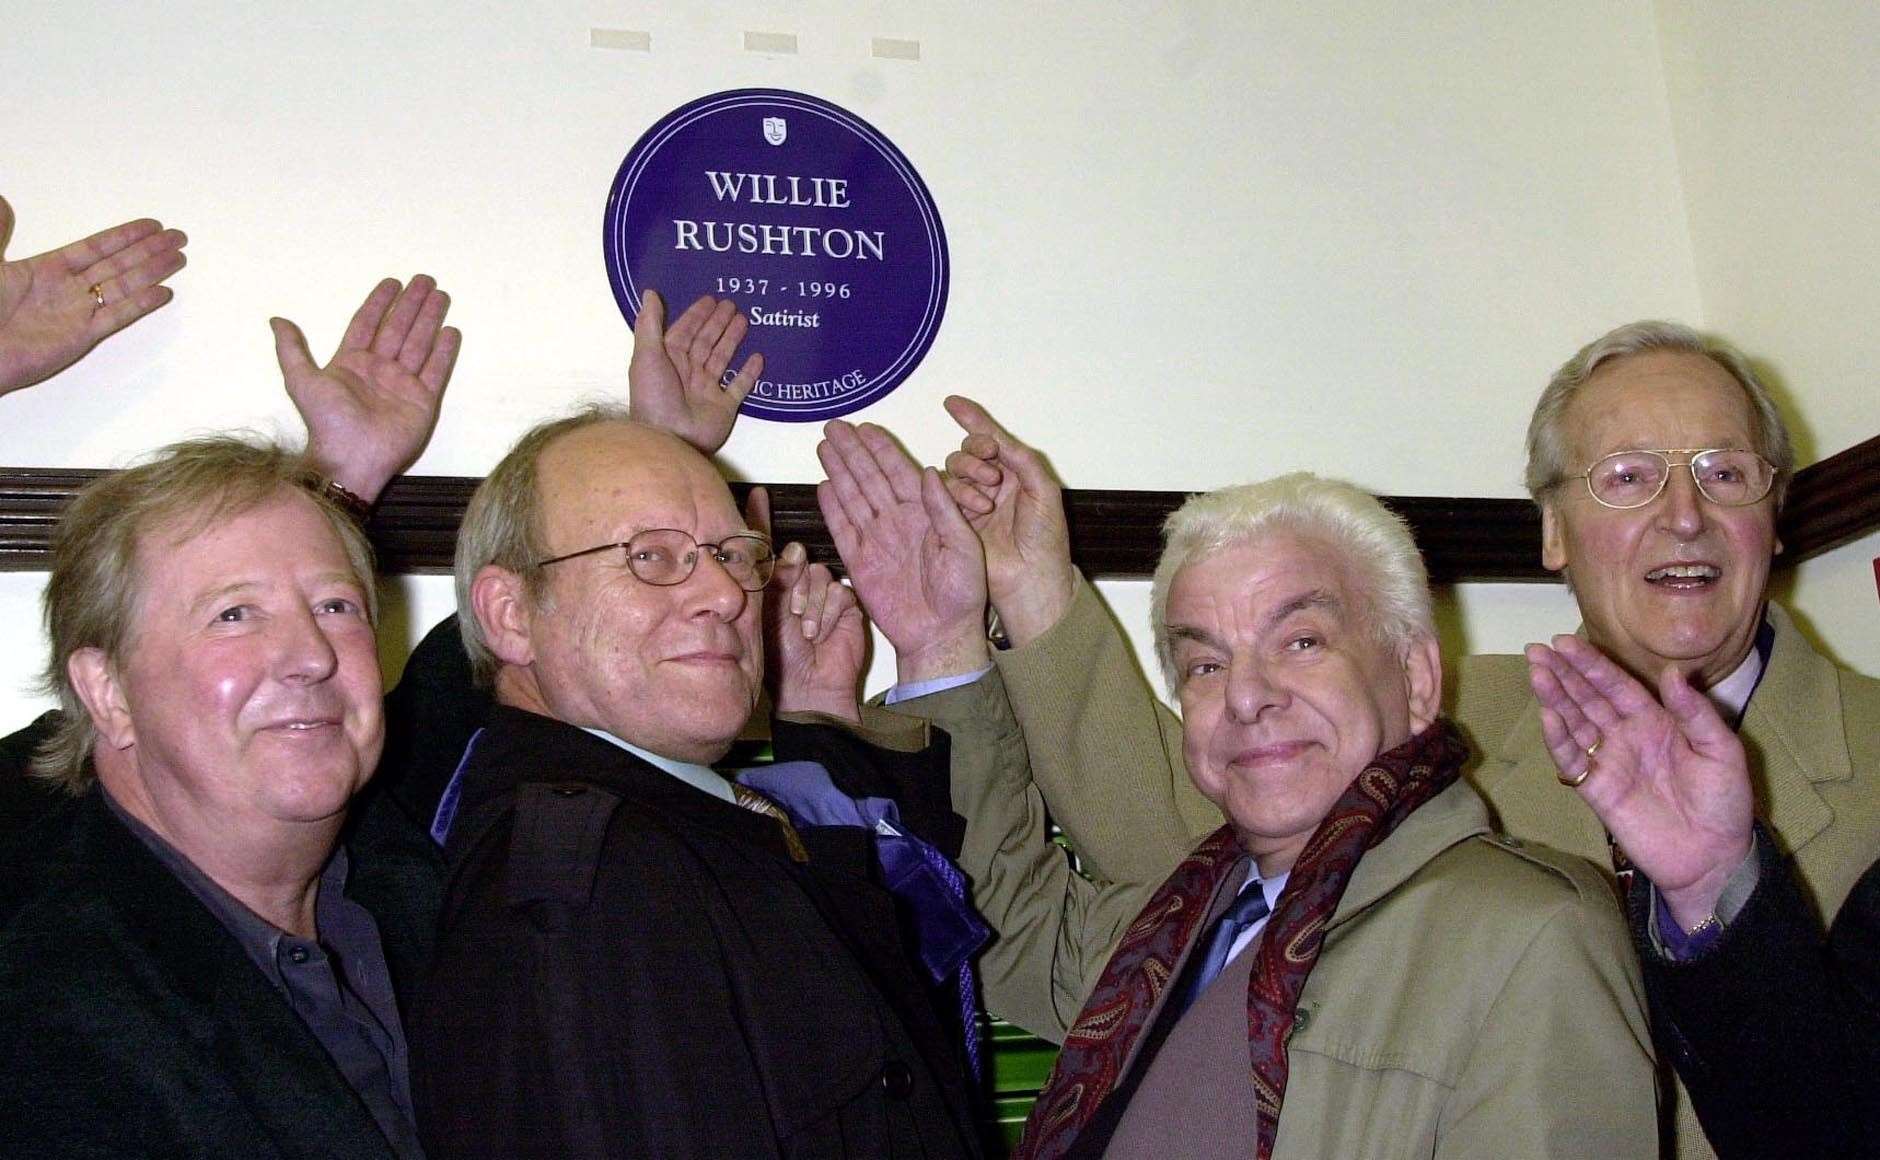 (from left) Comedians Tim Brooke-Taylor, Graeme Garden, Barry Cryer, and Nicholas Parsons at Mornington Crescent underground station in London, unveiling of a comic heritage plaque to Willie Rushton 2002 (John Stillwell/PA)